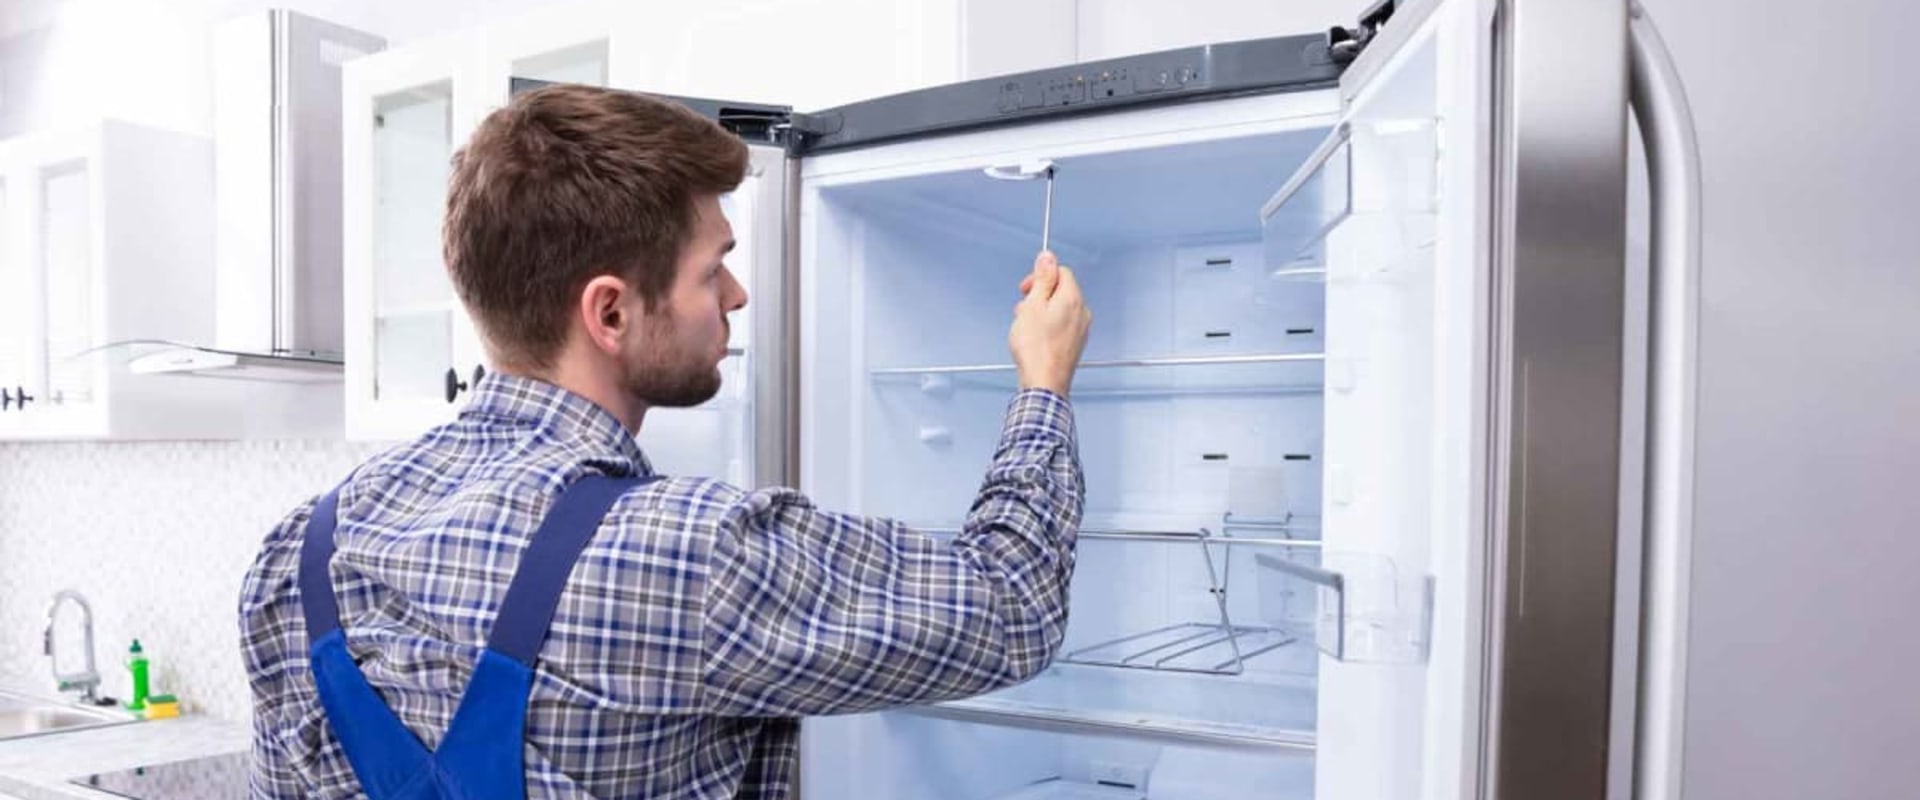 Repair or Replace: The Ultimate Guide to Fixing Your Fridge Freezer